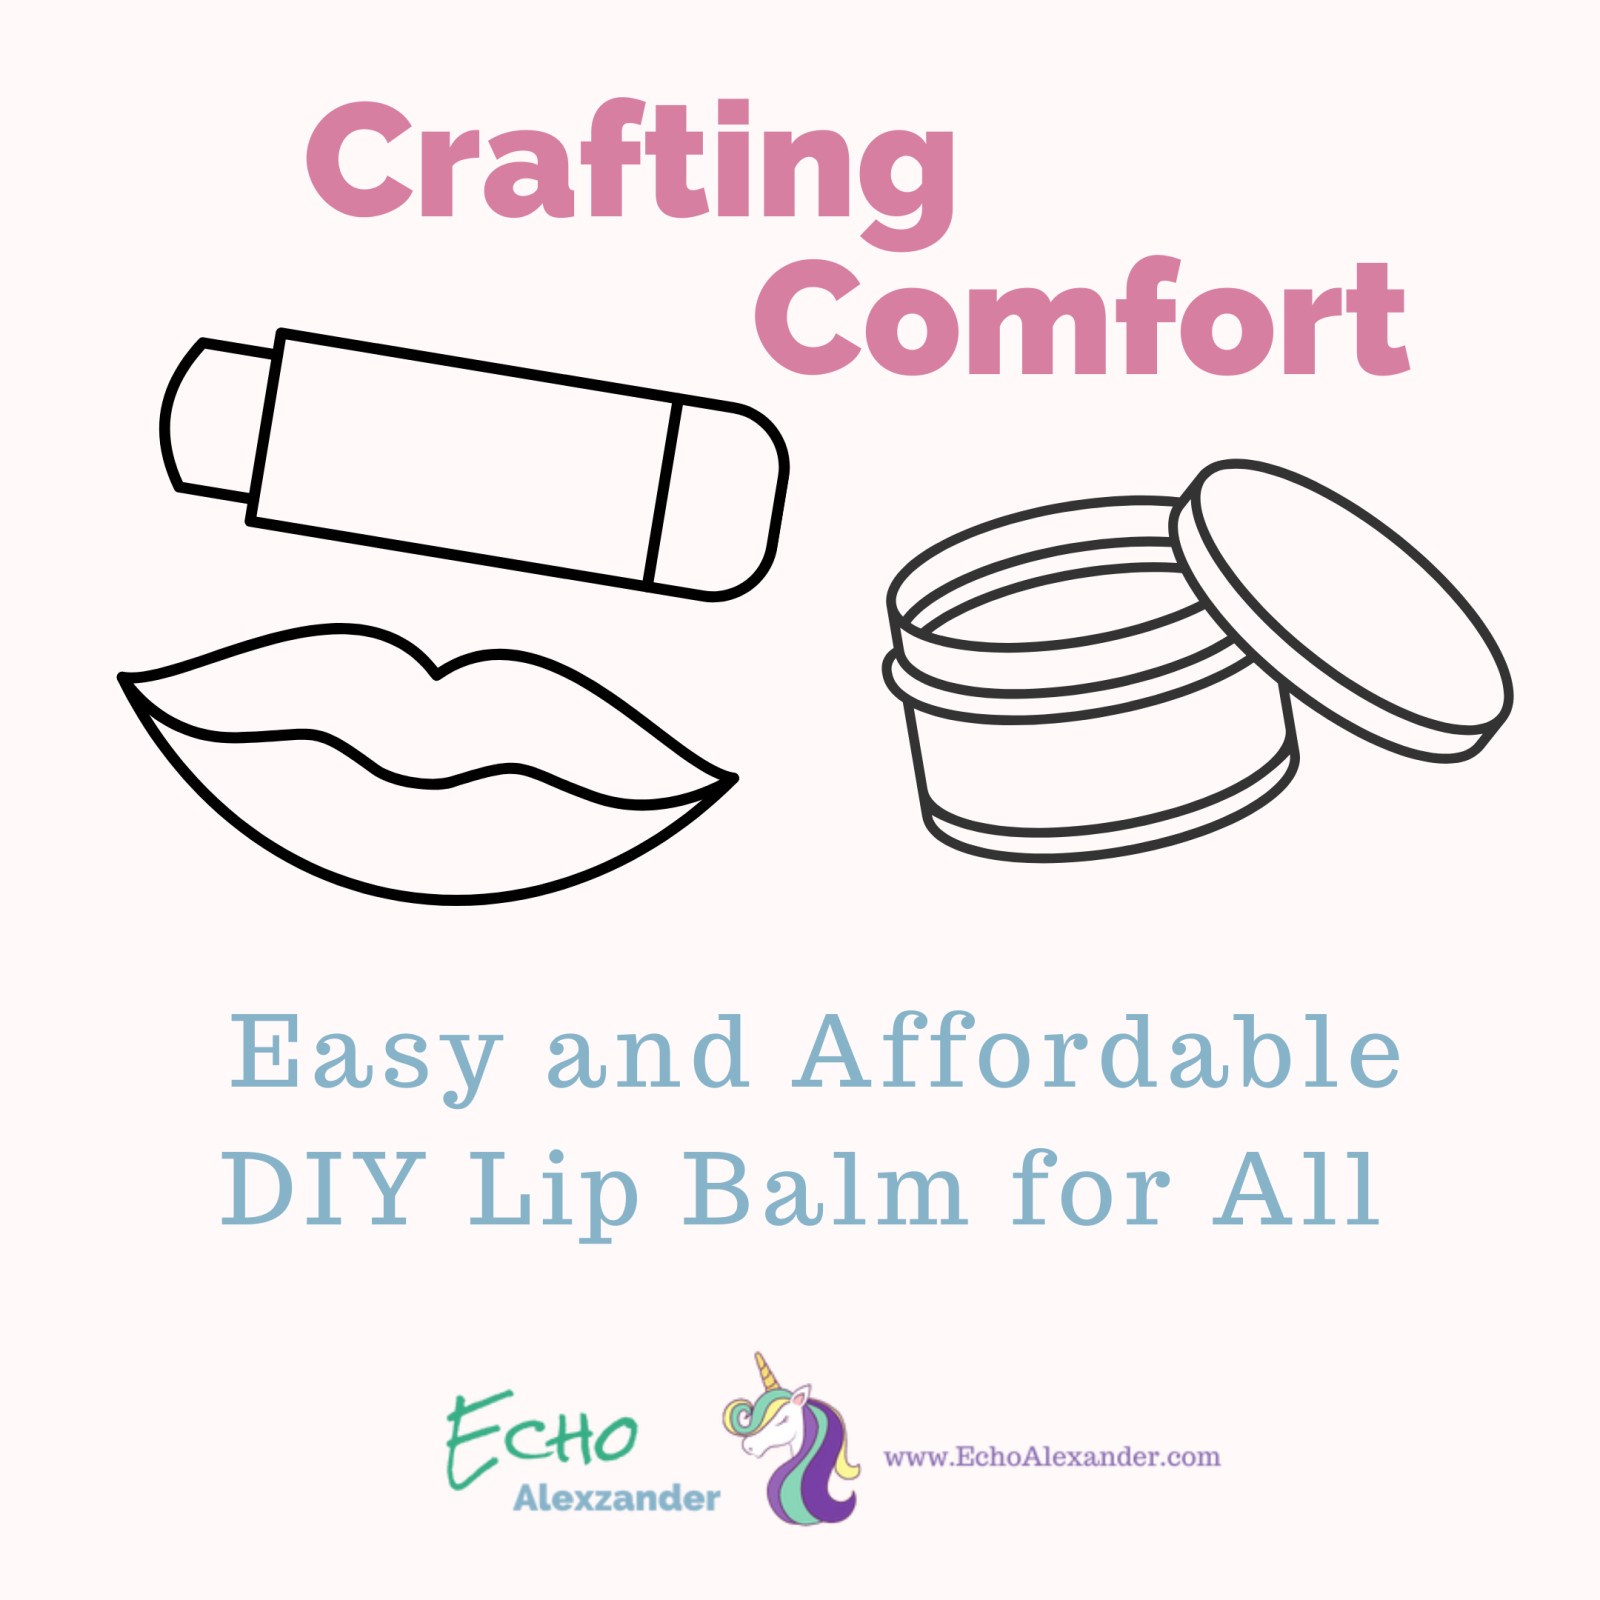 Crafting Comfort: Easy and Affordable DIY Lip Balm for All